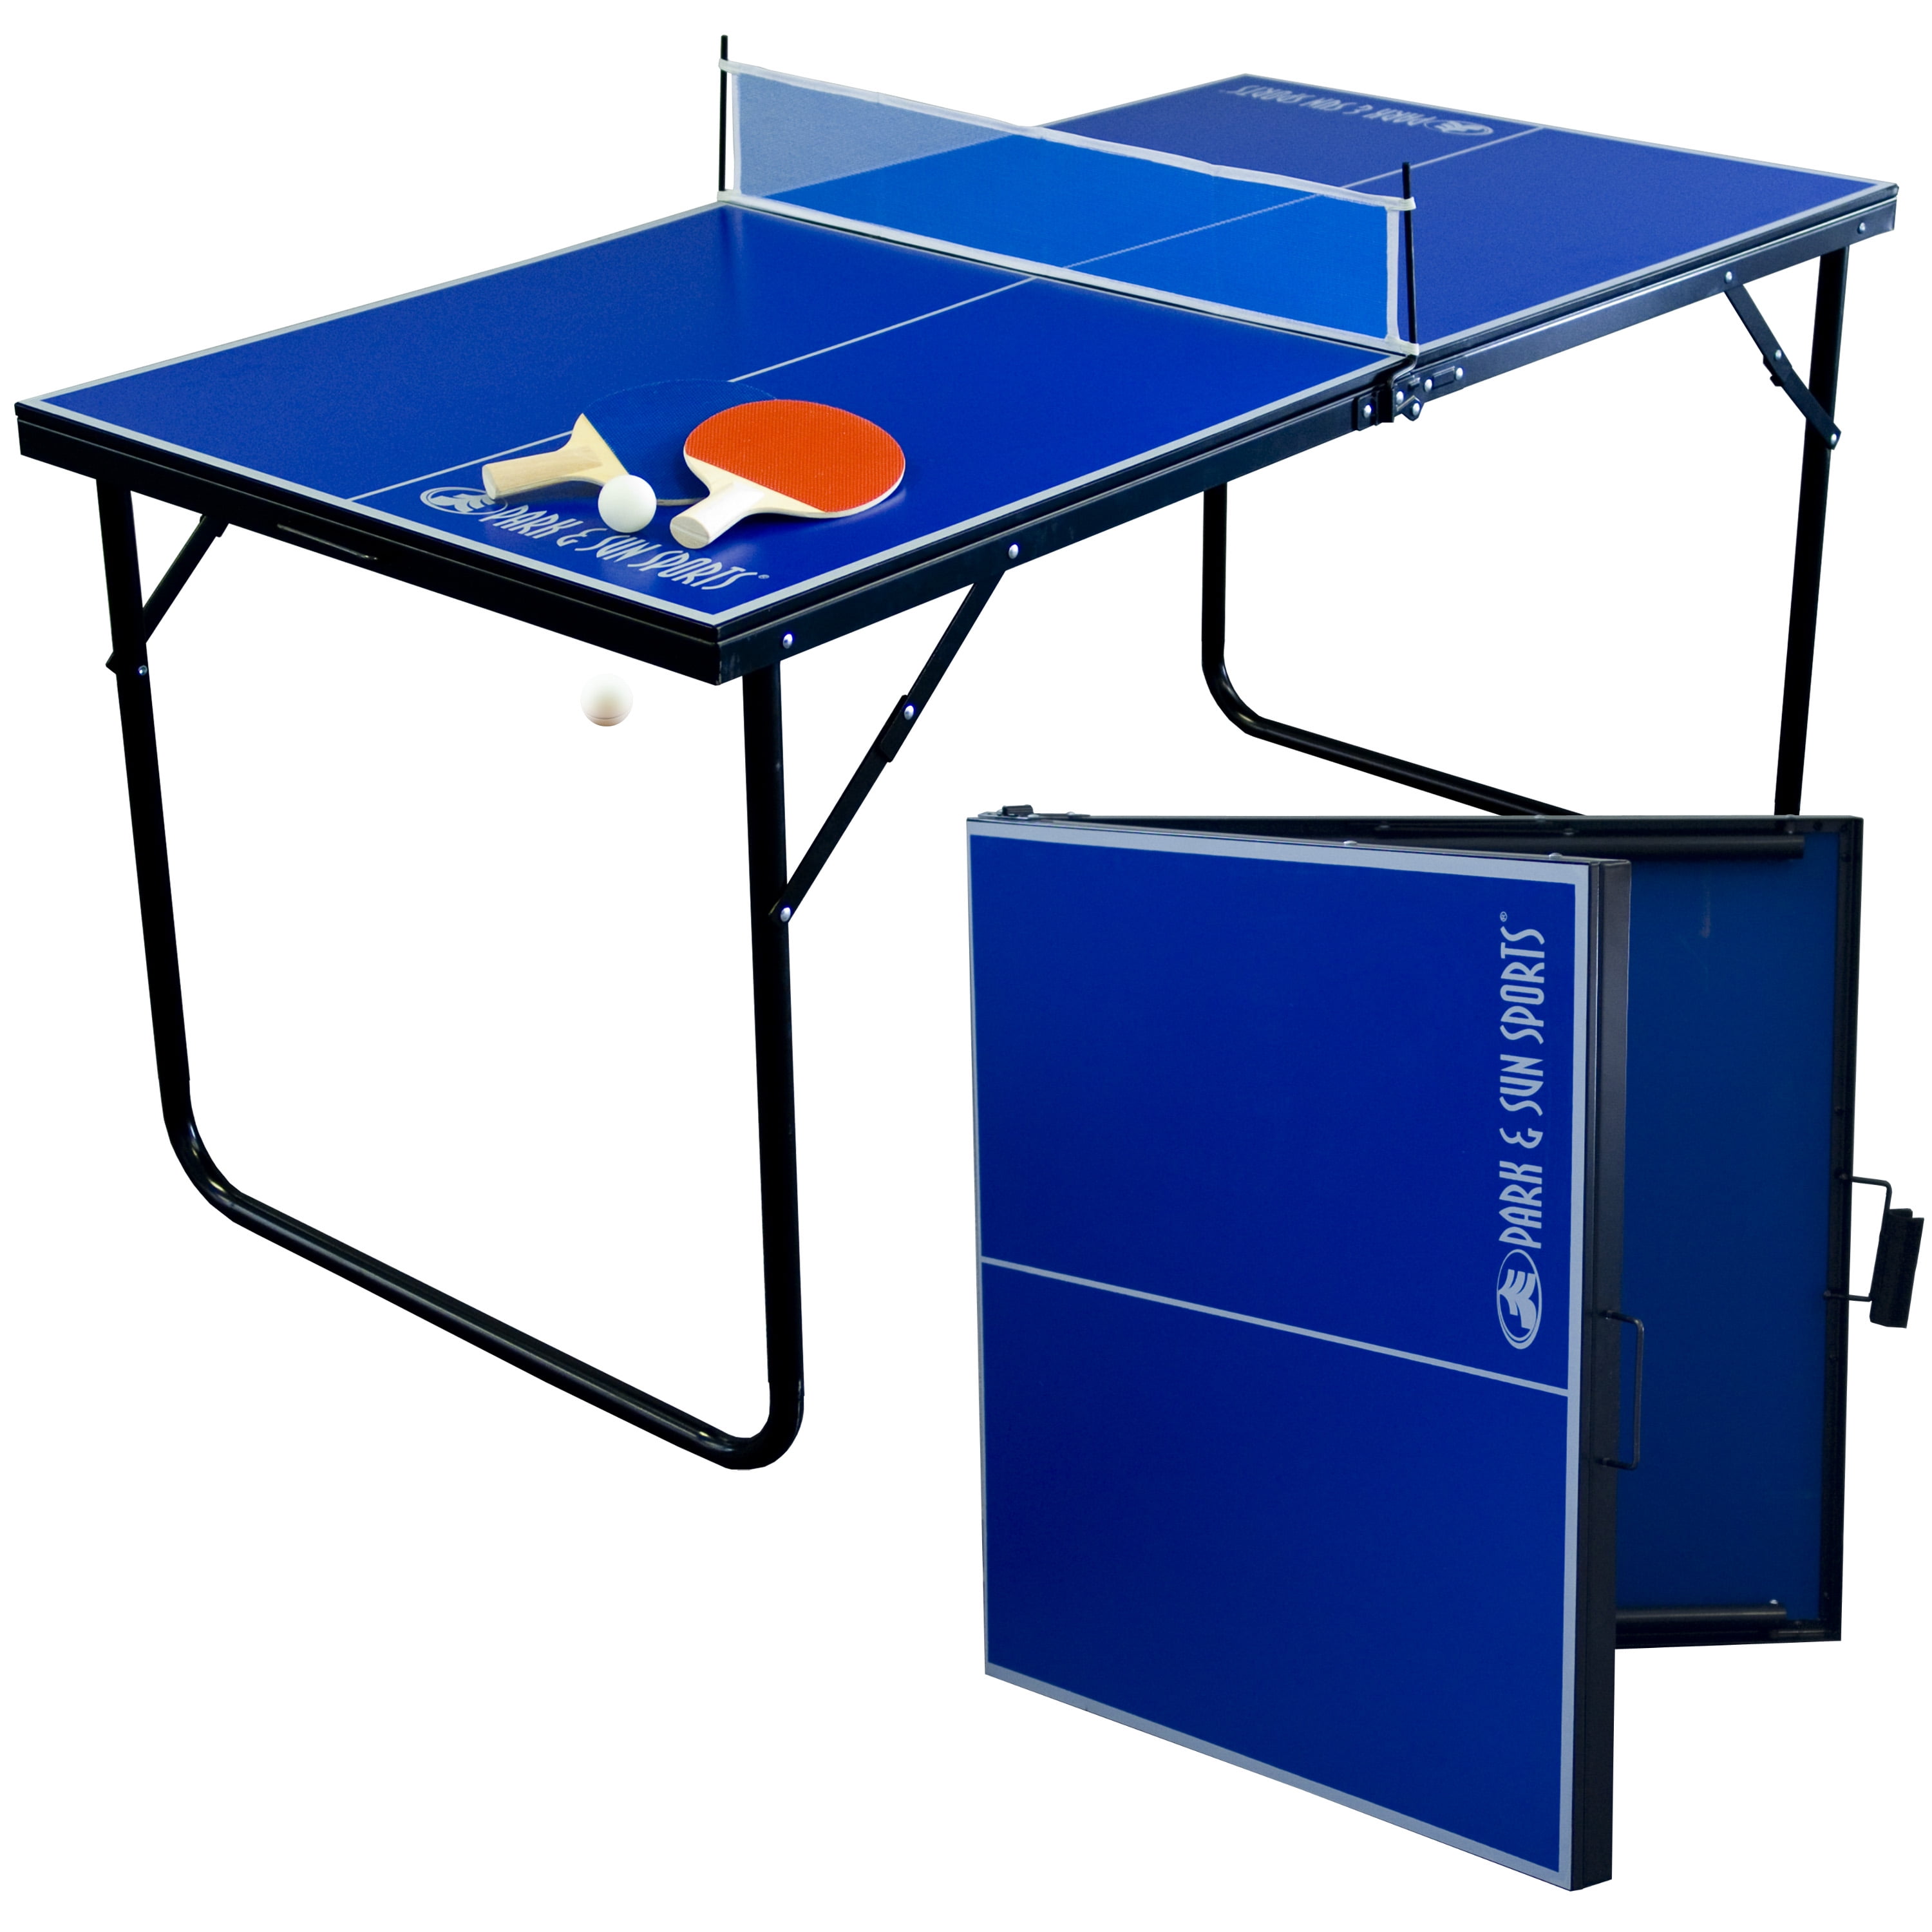 One Plastic Ball Entire Mini Table Tennis Sports Set Ping Pong Set for Kids Yellow One Mini Net Set with Suction Stands Set Includes Two Mini Size Rackets Sunflex Mini Table Tennis Set 